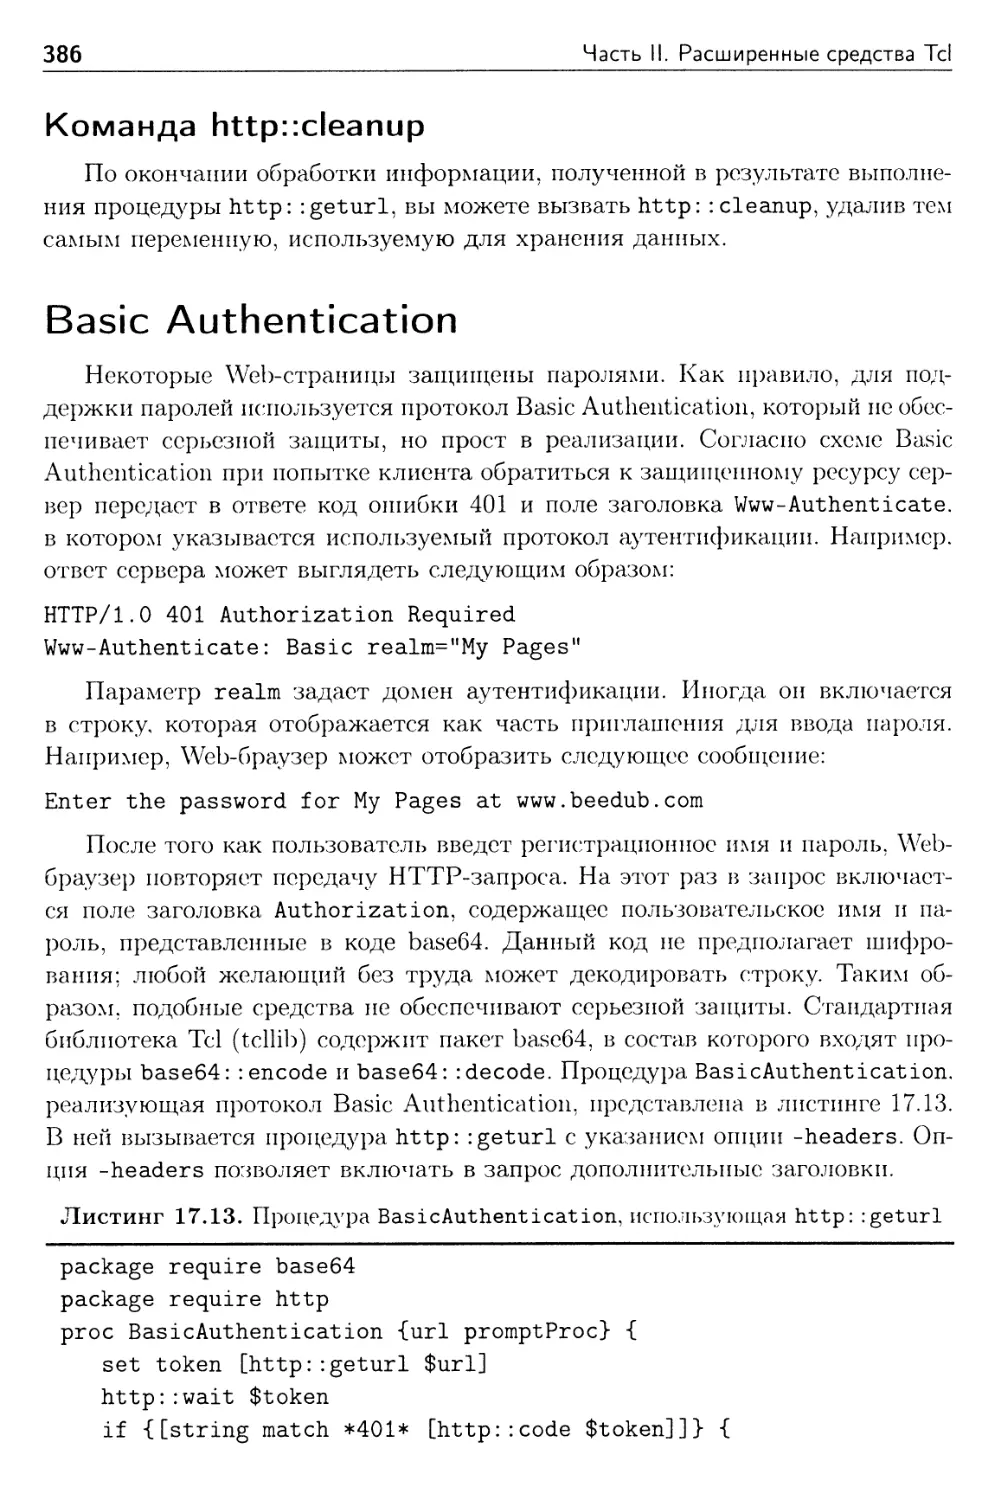 Команда http::cleanup
Basic Authentication